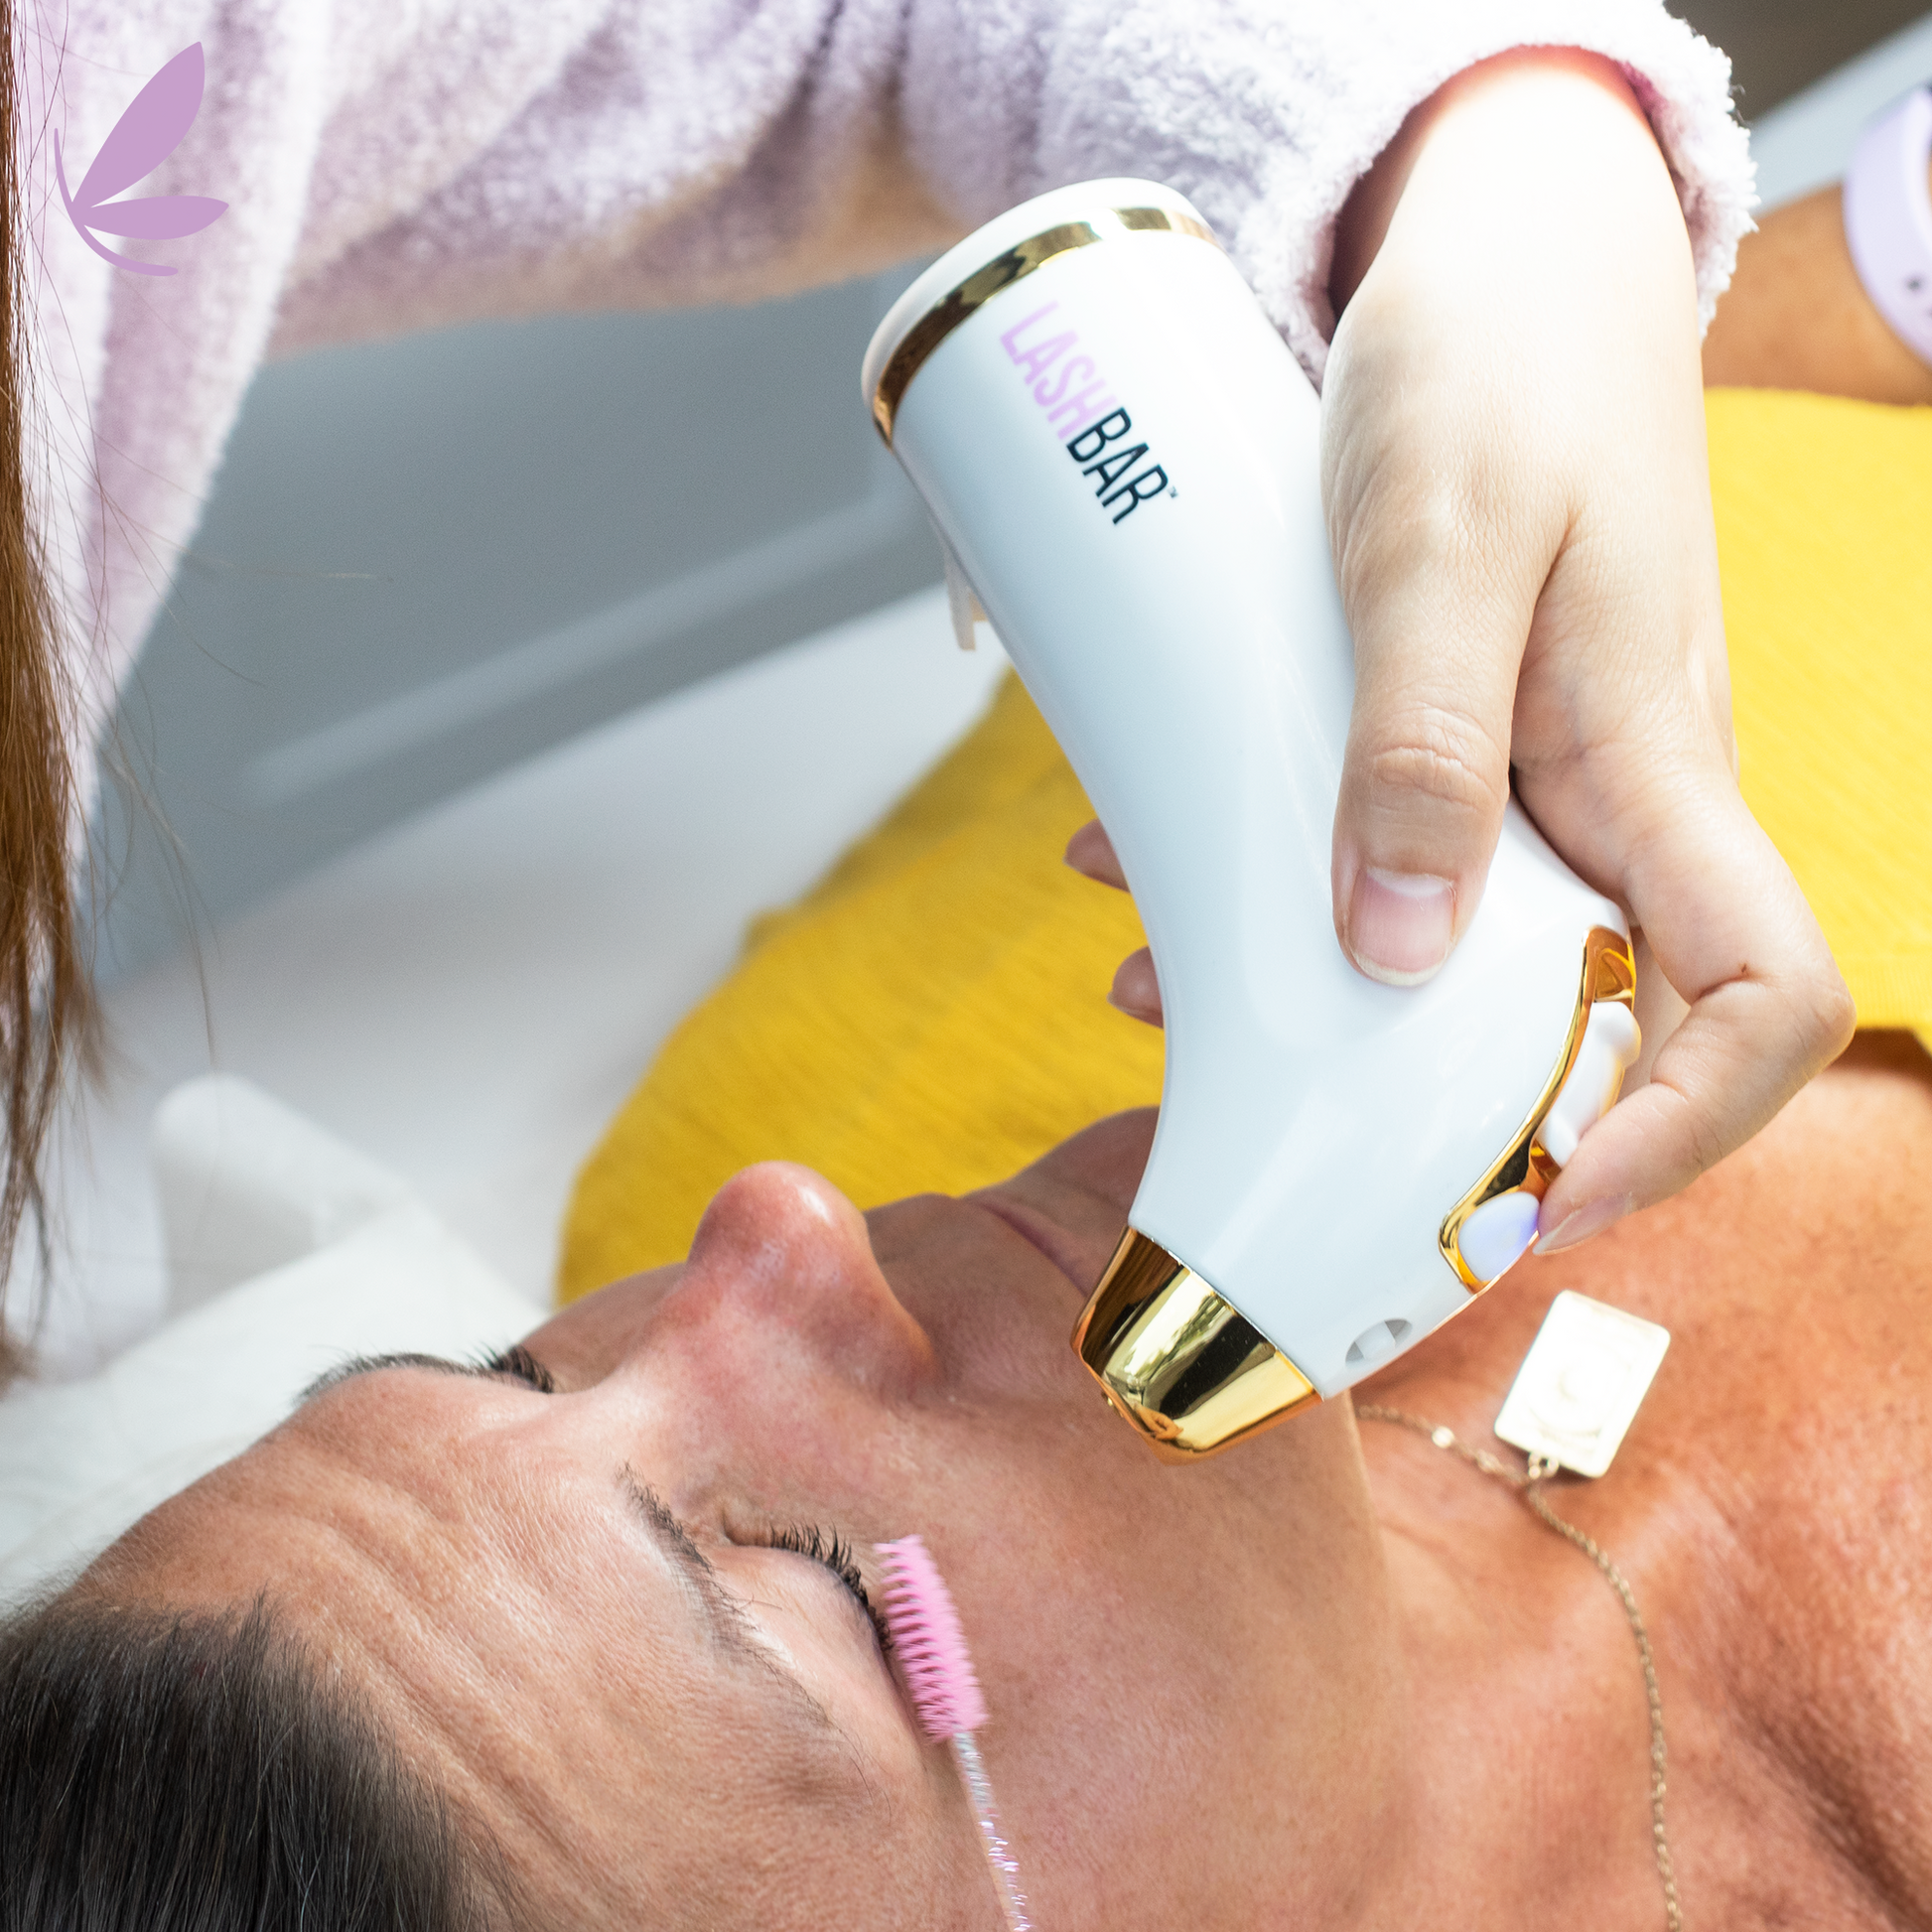 Air lash machine in use during appointment drying lash adhesive